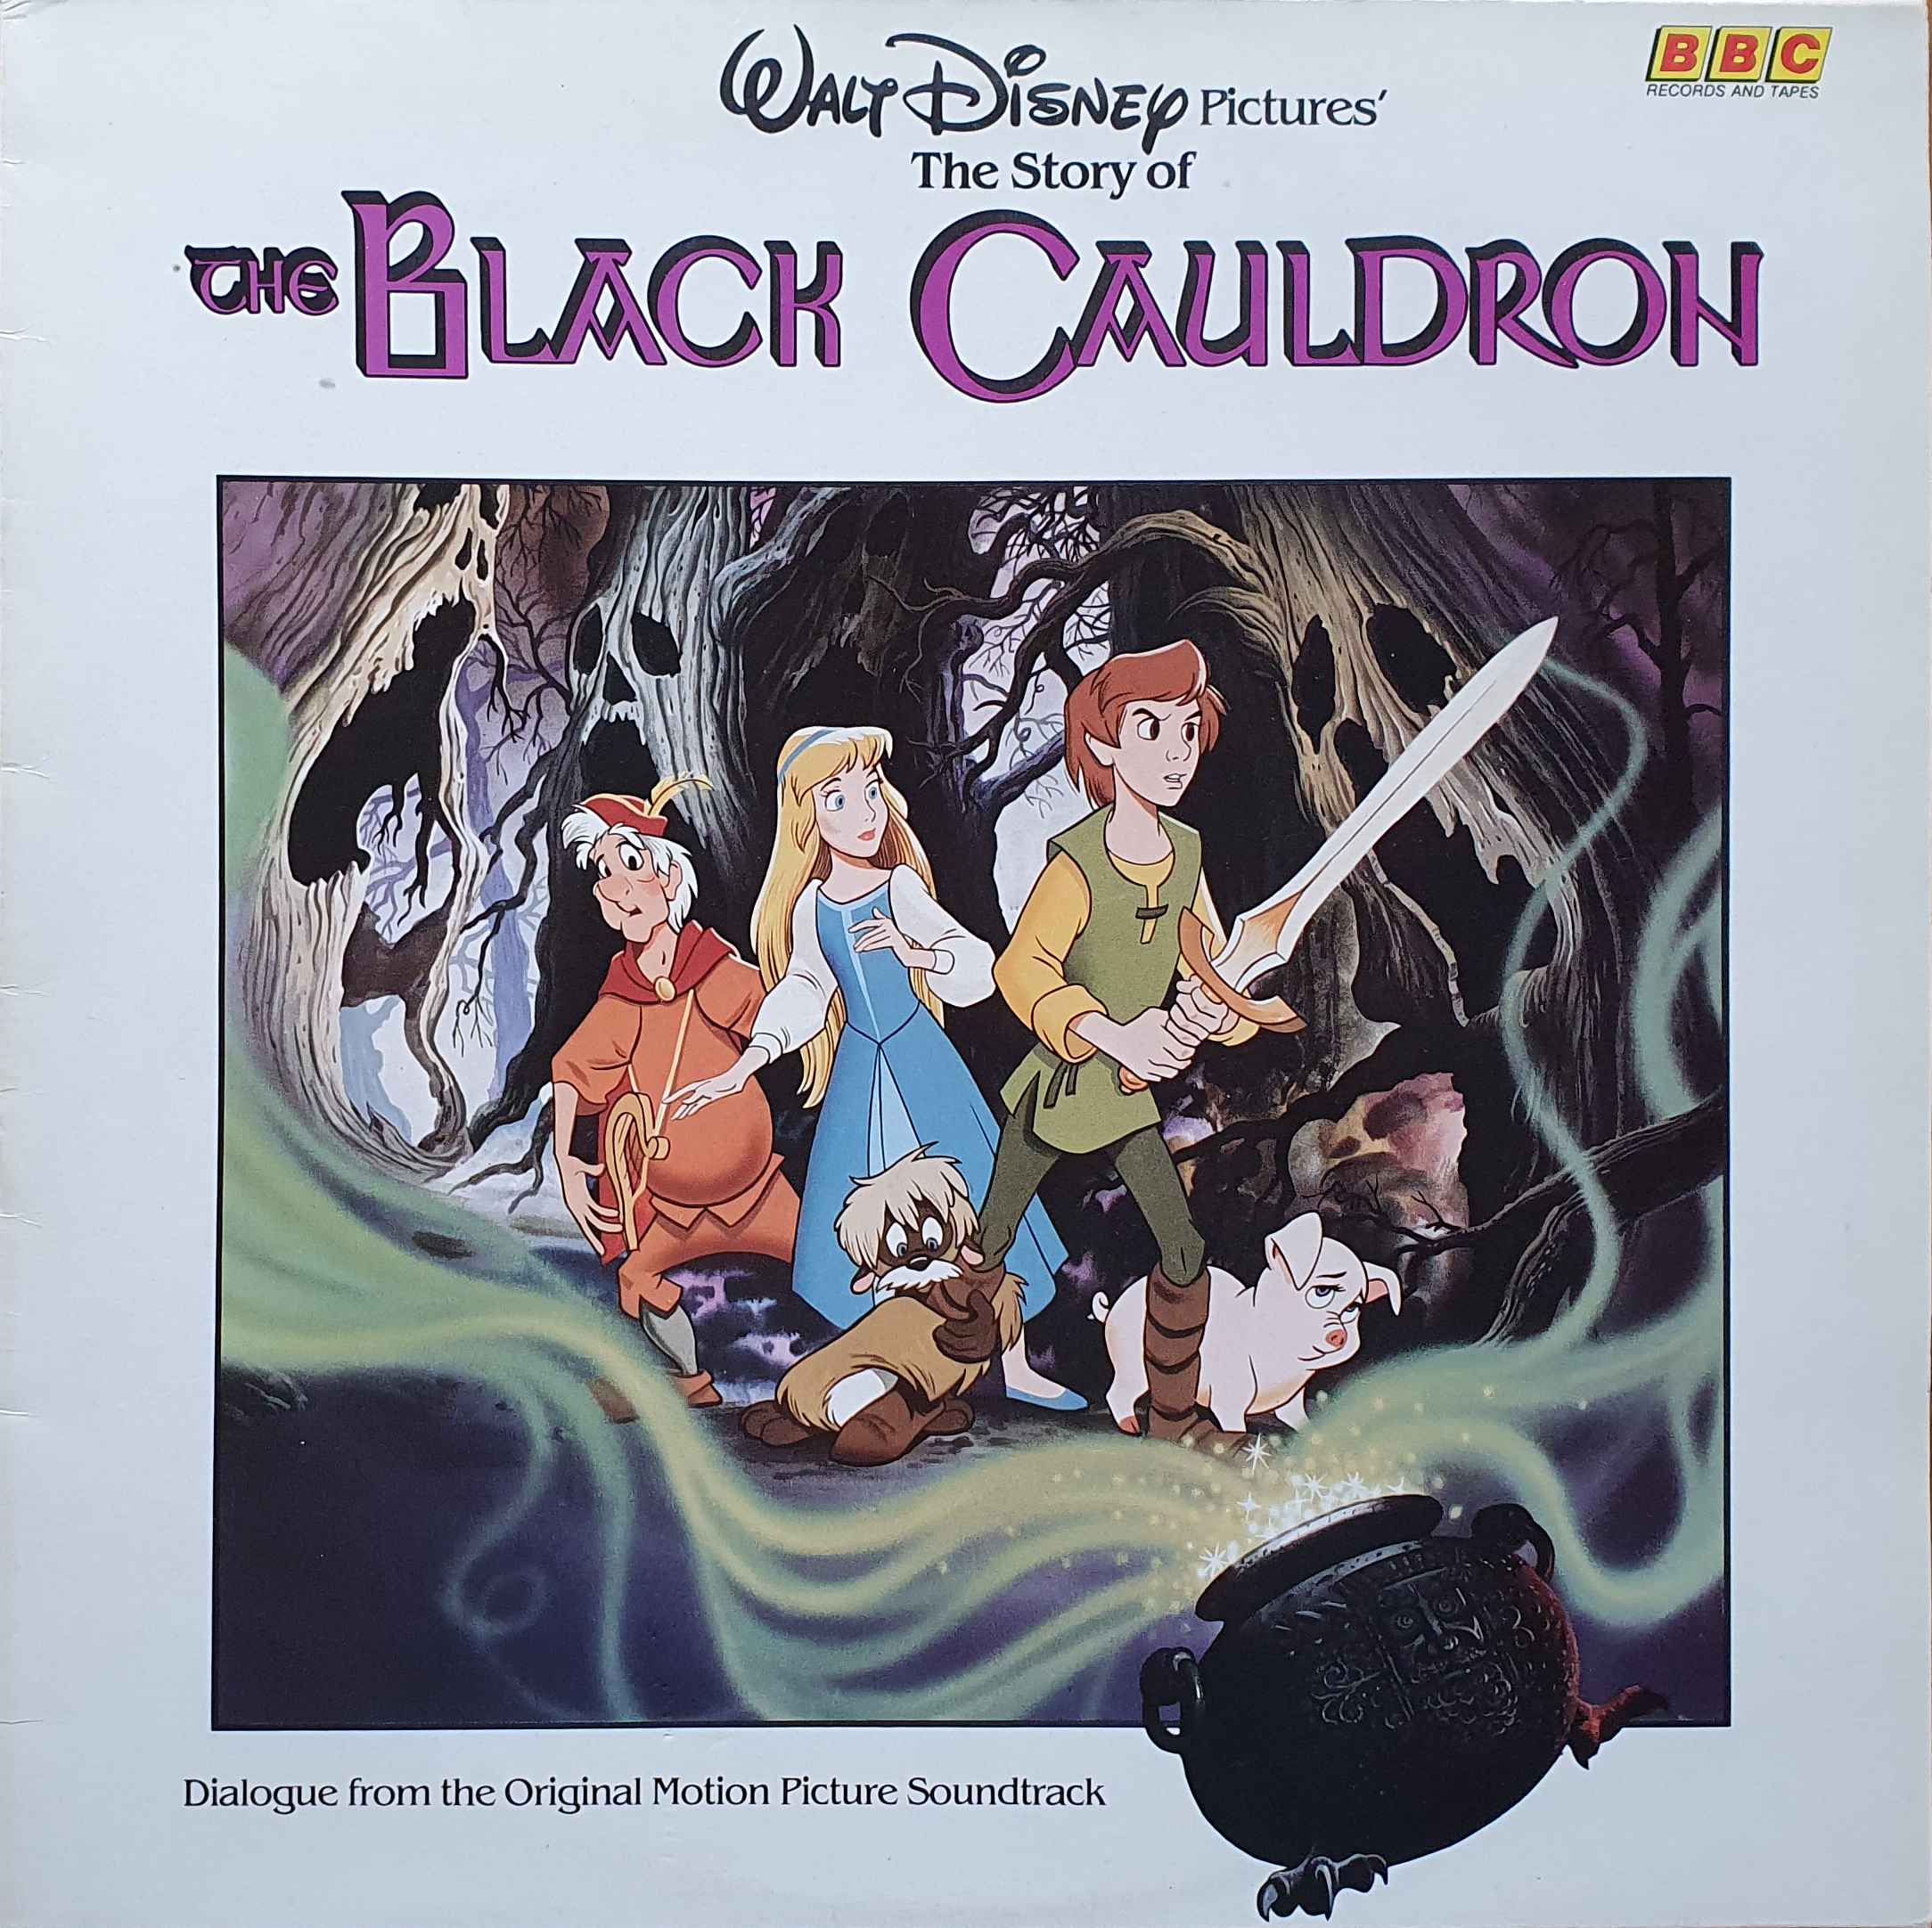 Picture of REH 578 The black cauldron by artist Ted Berman / Vance Gerry / Joe Hale / David Jonas / Roy Morita / Richard Rich / Art Stevens / Al Wilson / Peter Young / Ron Clements / John Musker from the BBC albums - Records and Tapes library